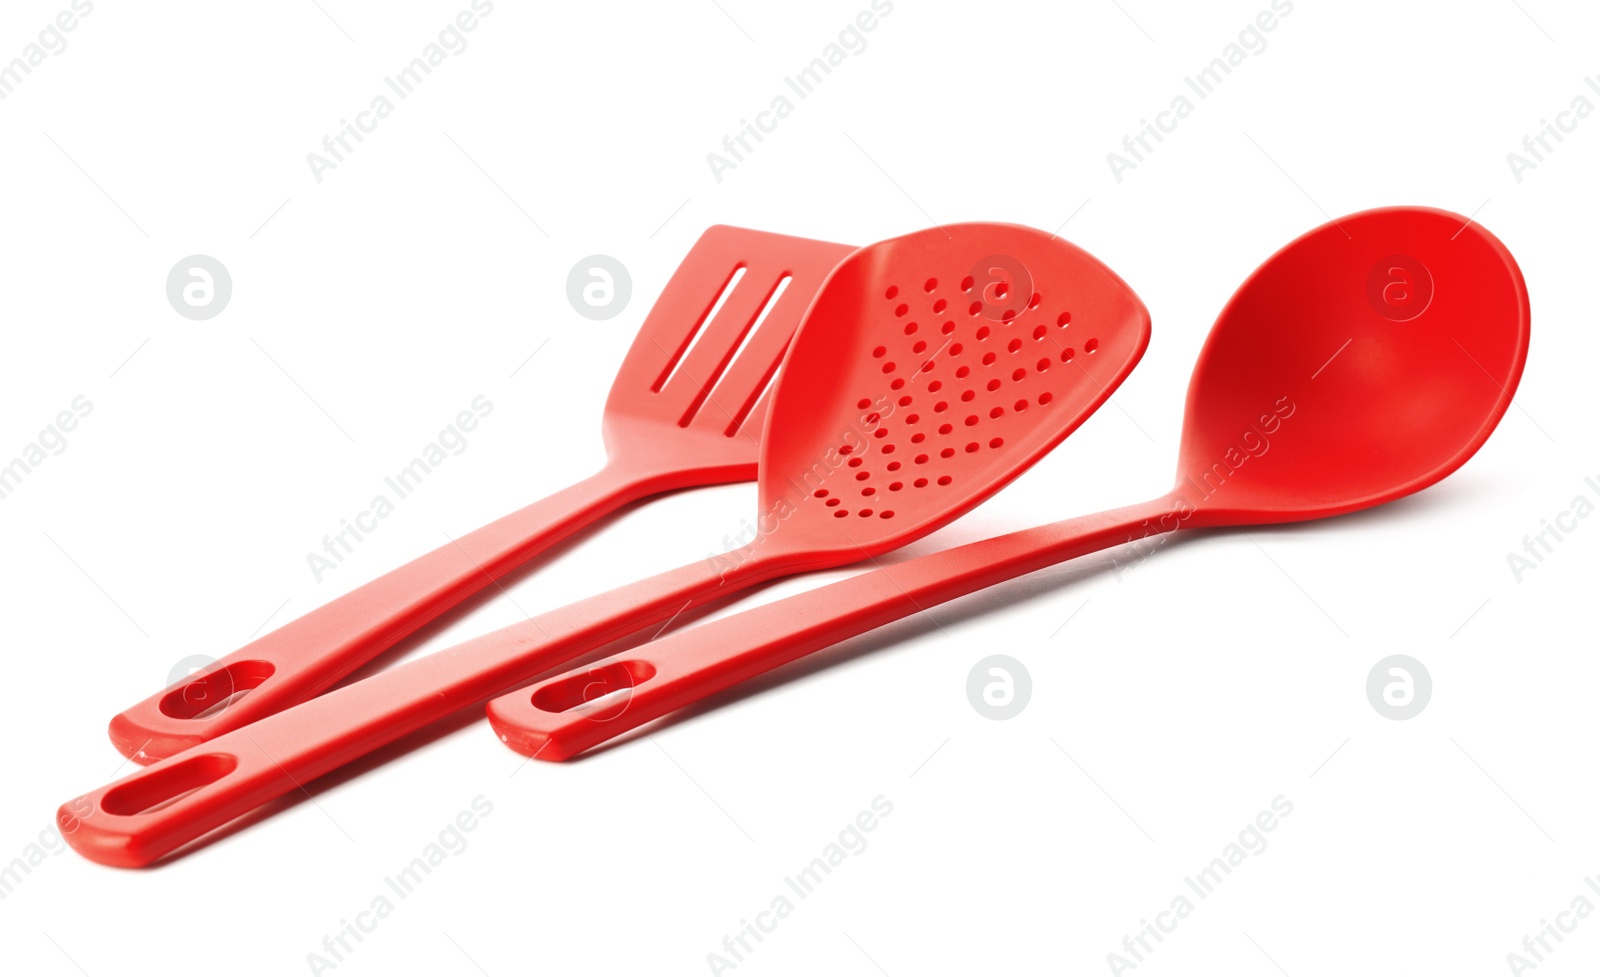 Photo of Different colorful kitchen utensils on white background